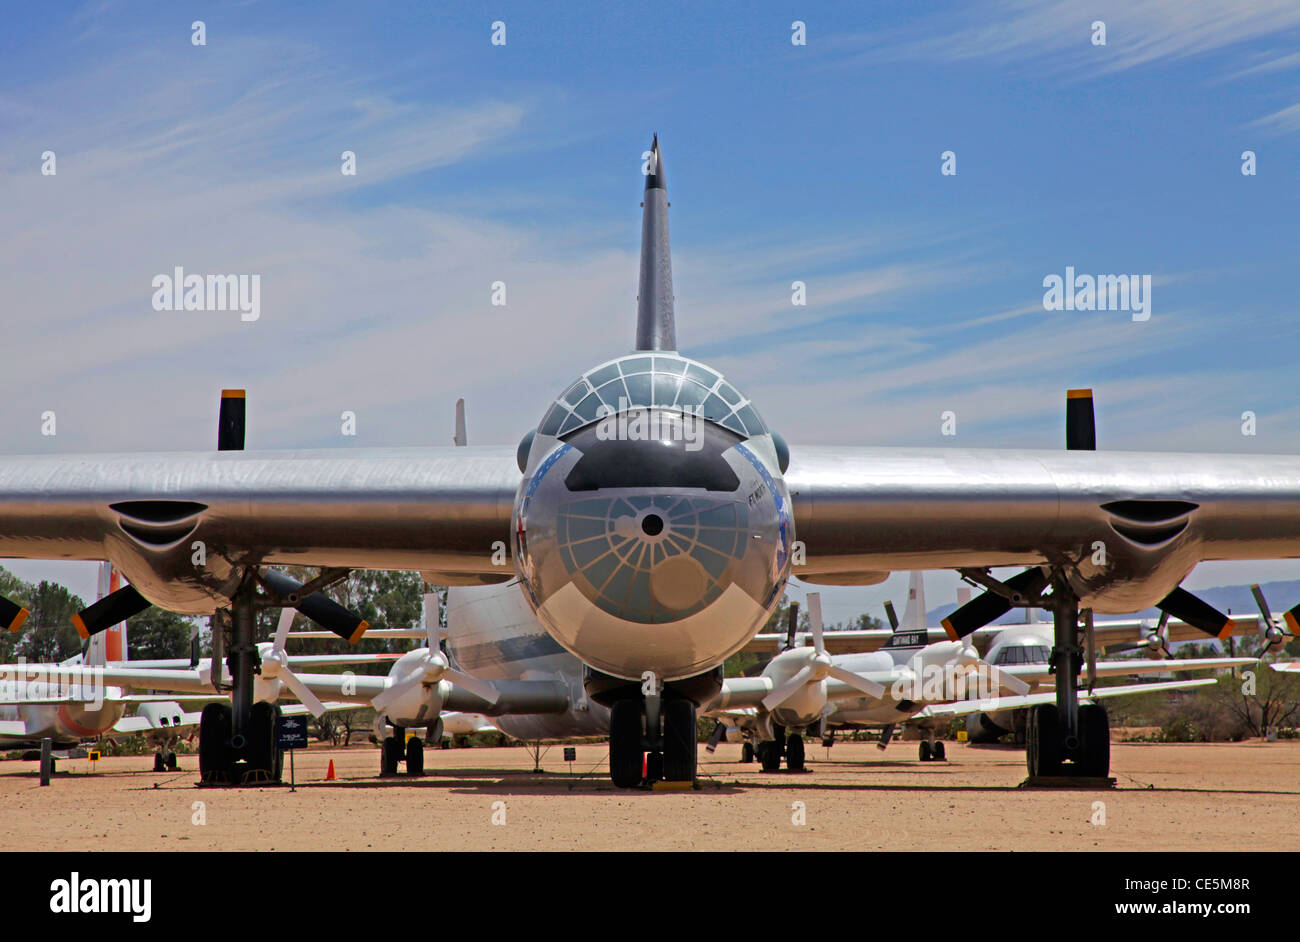 The Convair B-36 Peacemaker strategic bomber aircraft on display at Pima Museum Stock Photo